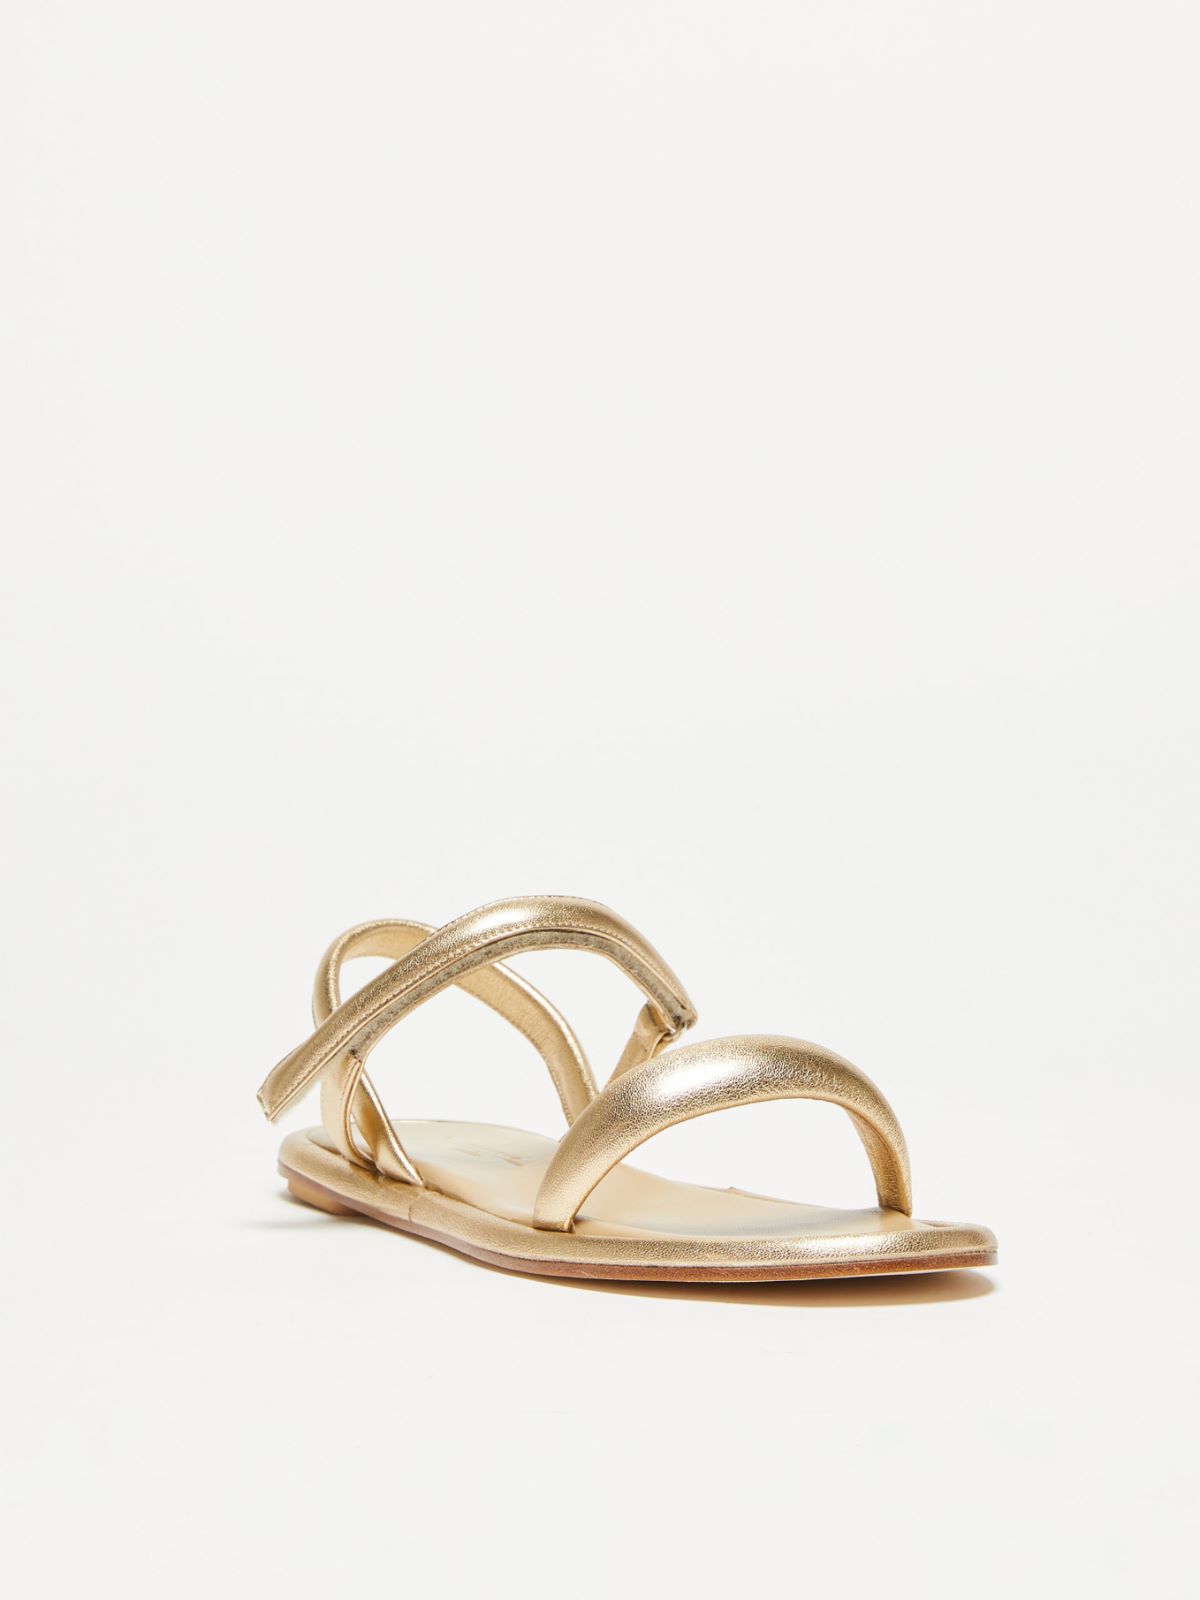 Sandals in nappa leather - GOLD - Weekend Max Mara - 2